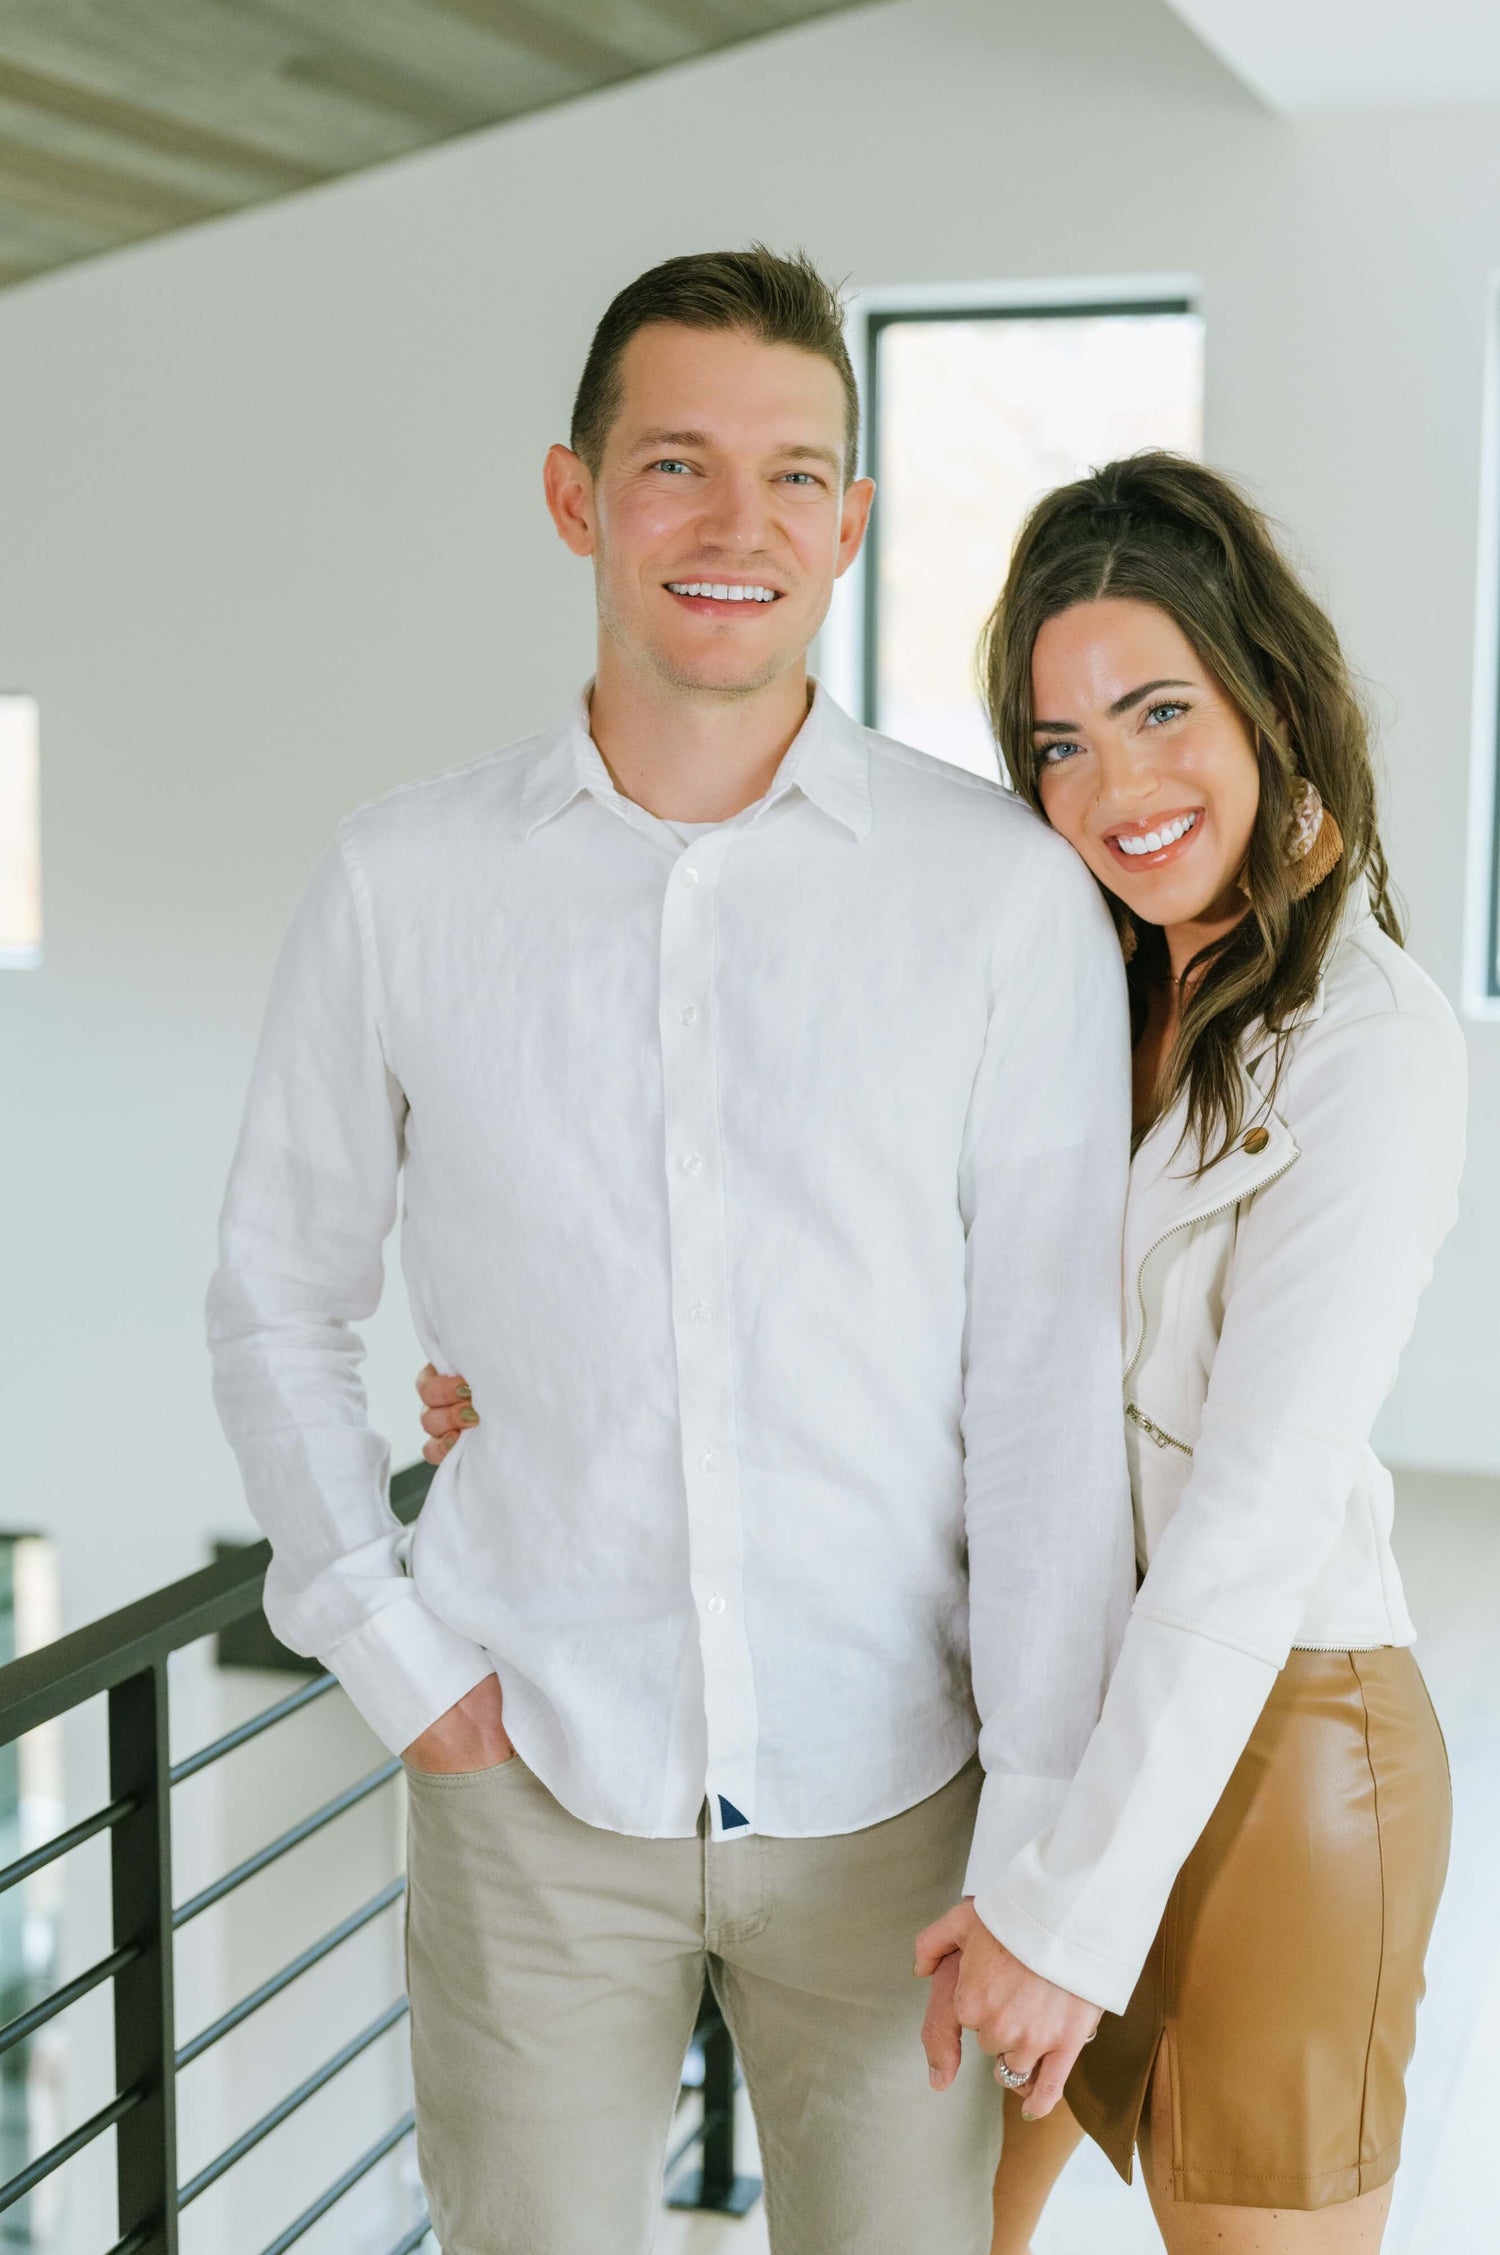 Smiling couple holding hands indoors, dressed in white shirts, exuding a relaxed and happy demeanor.